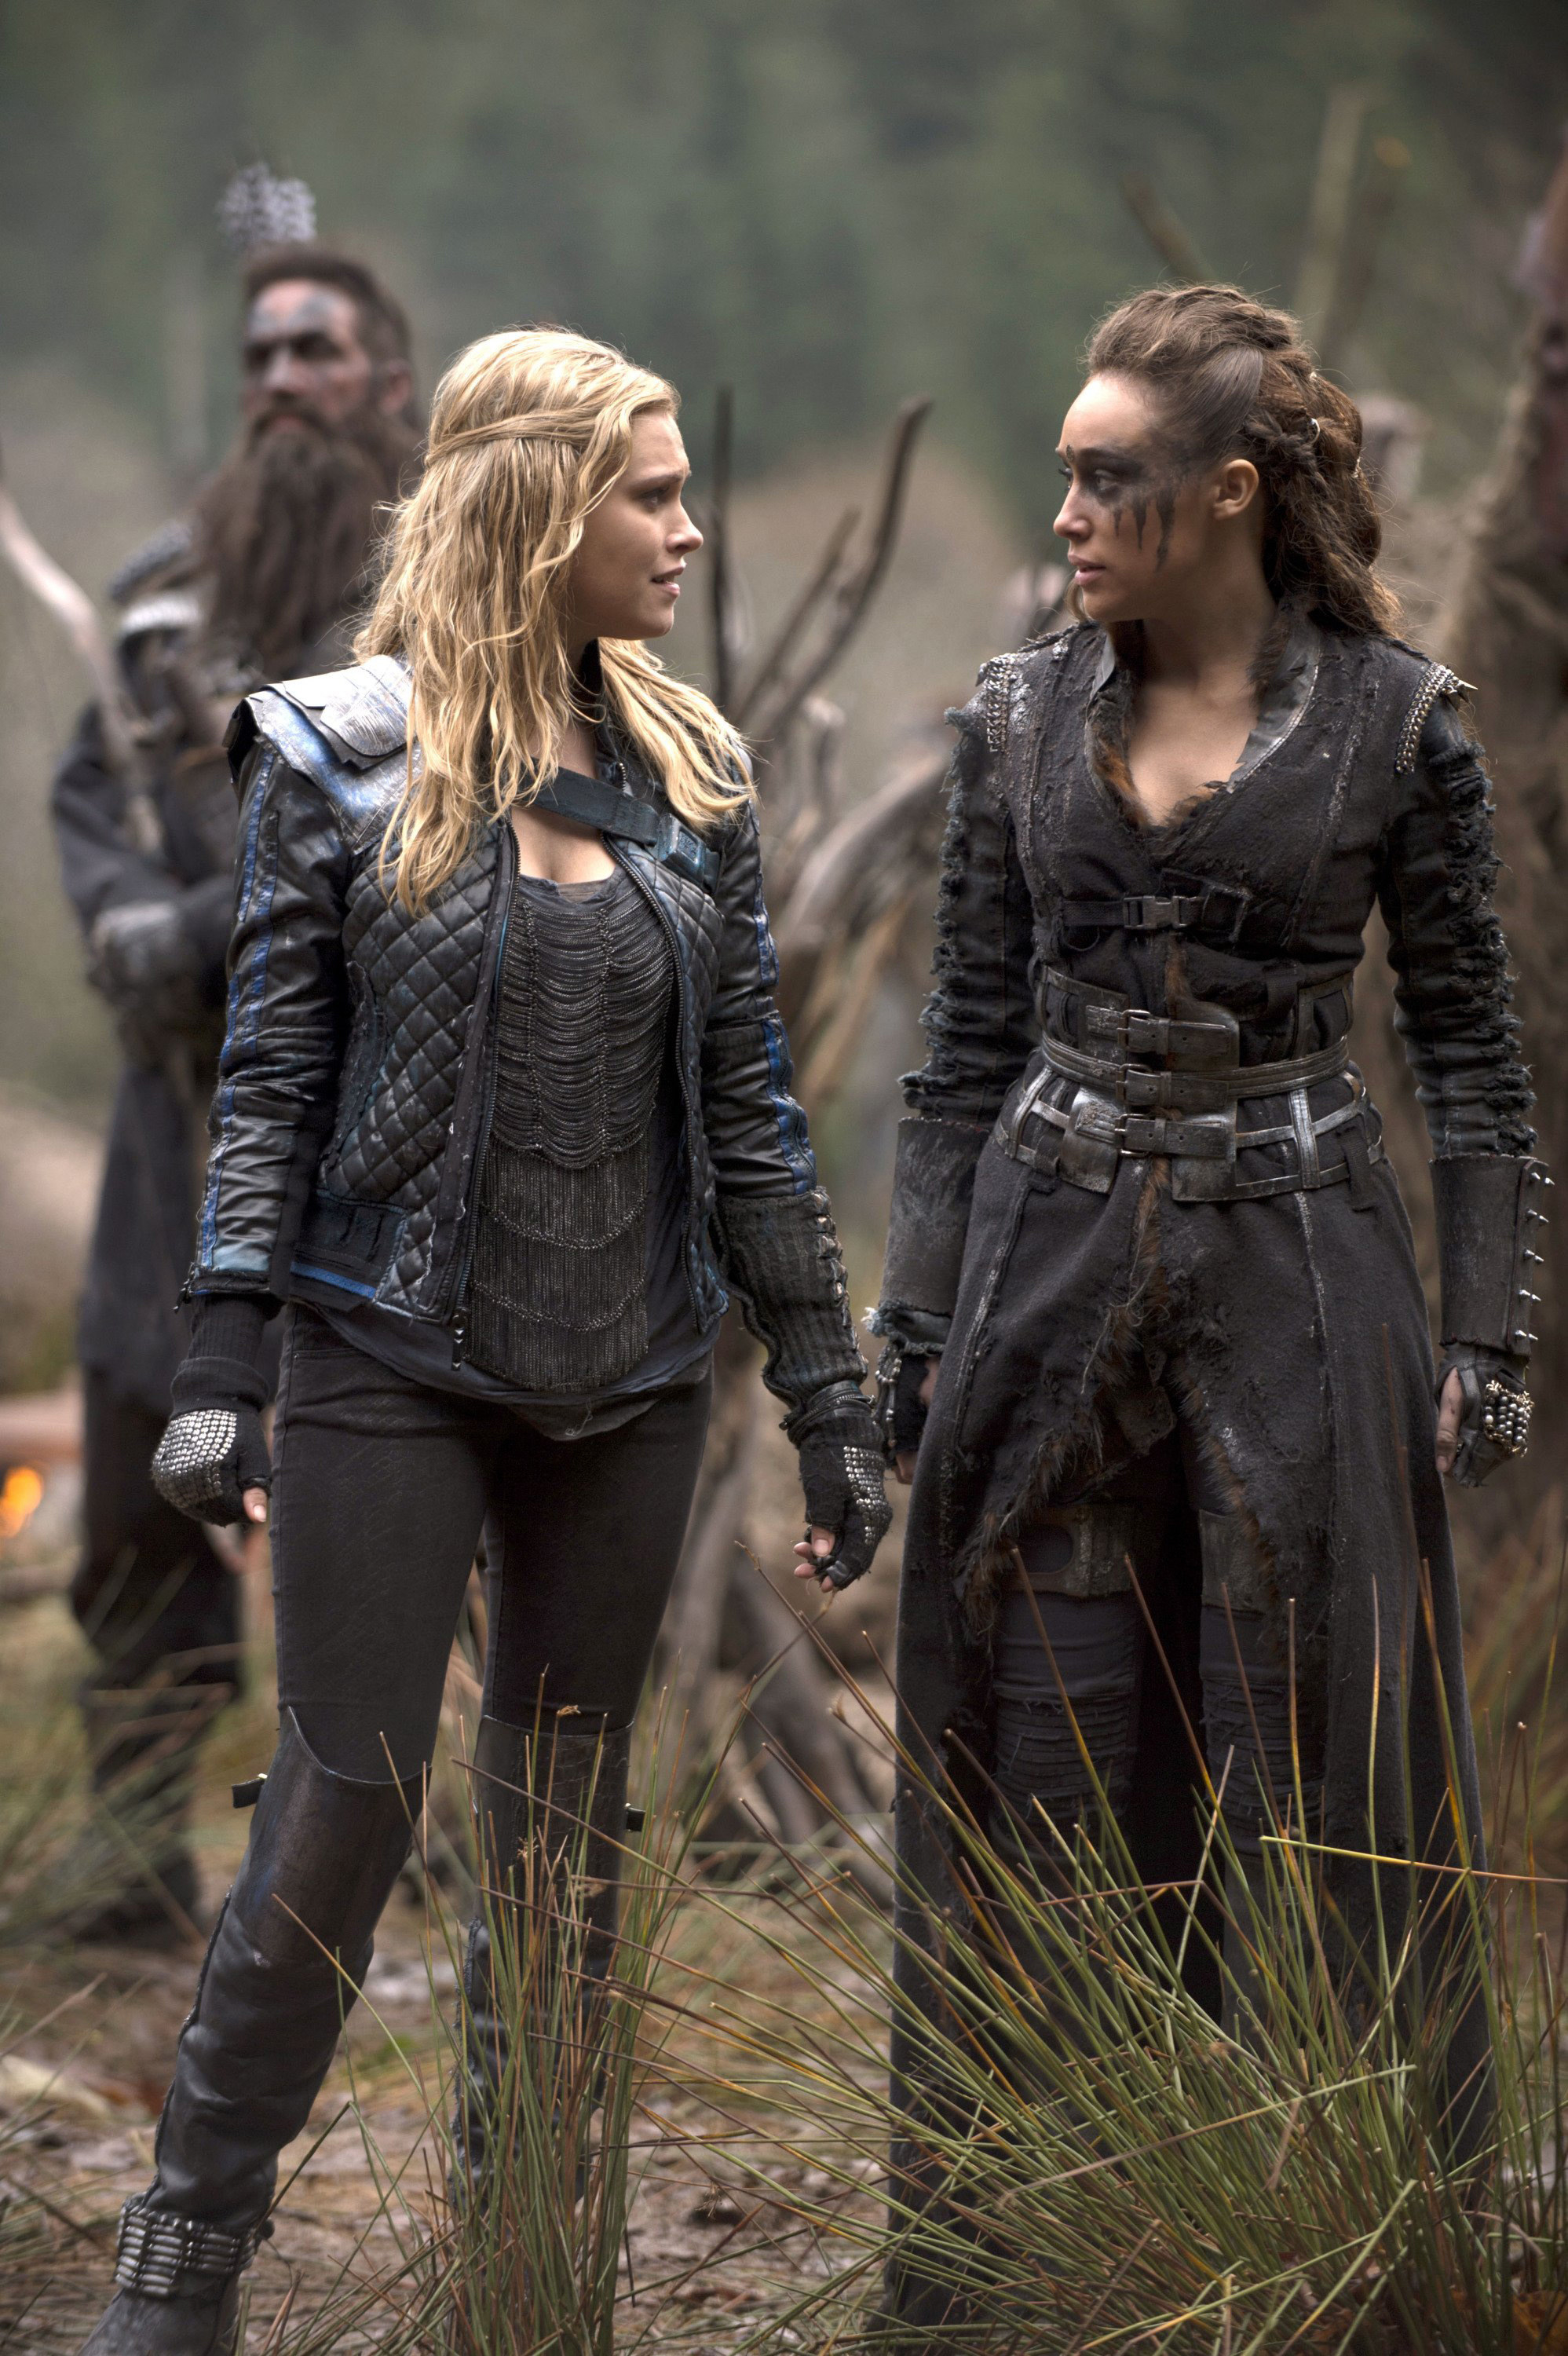 Clarke and Lexa in The 100